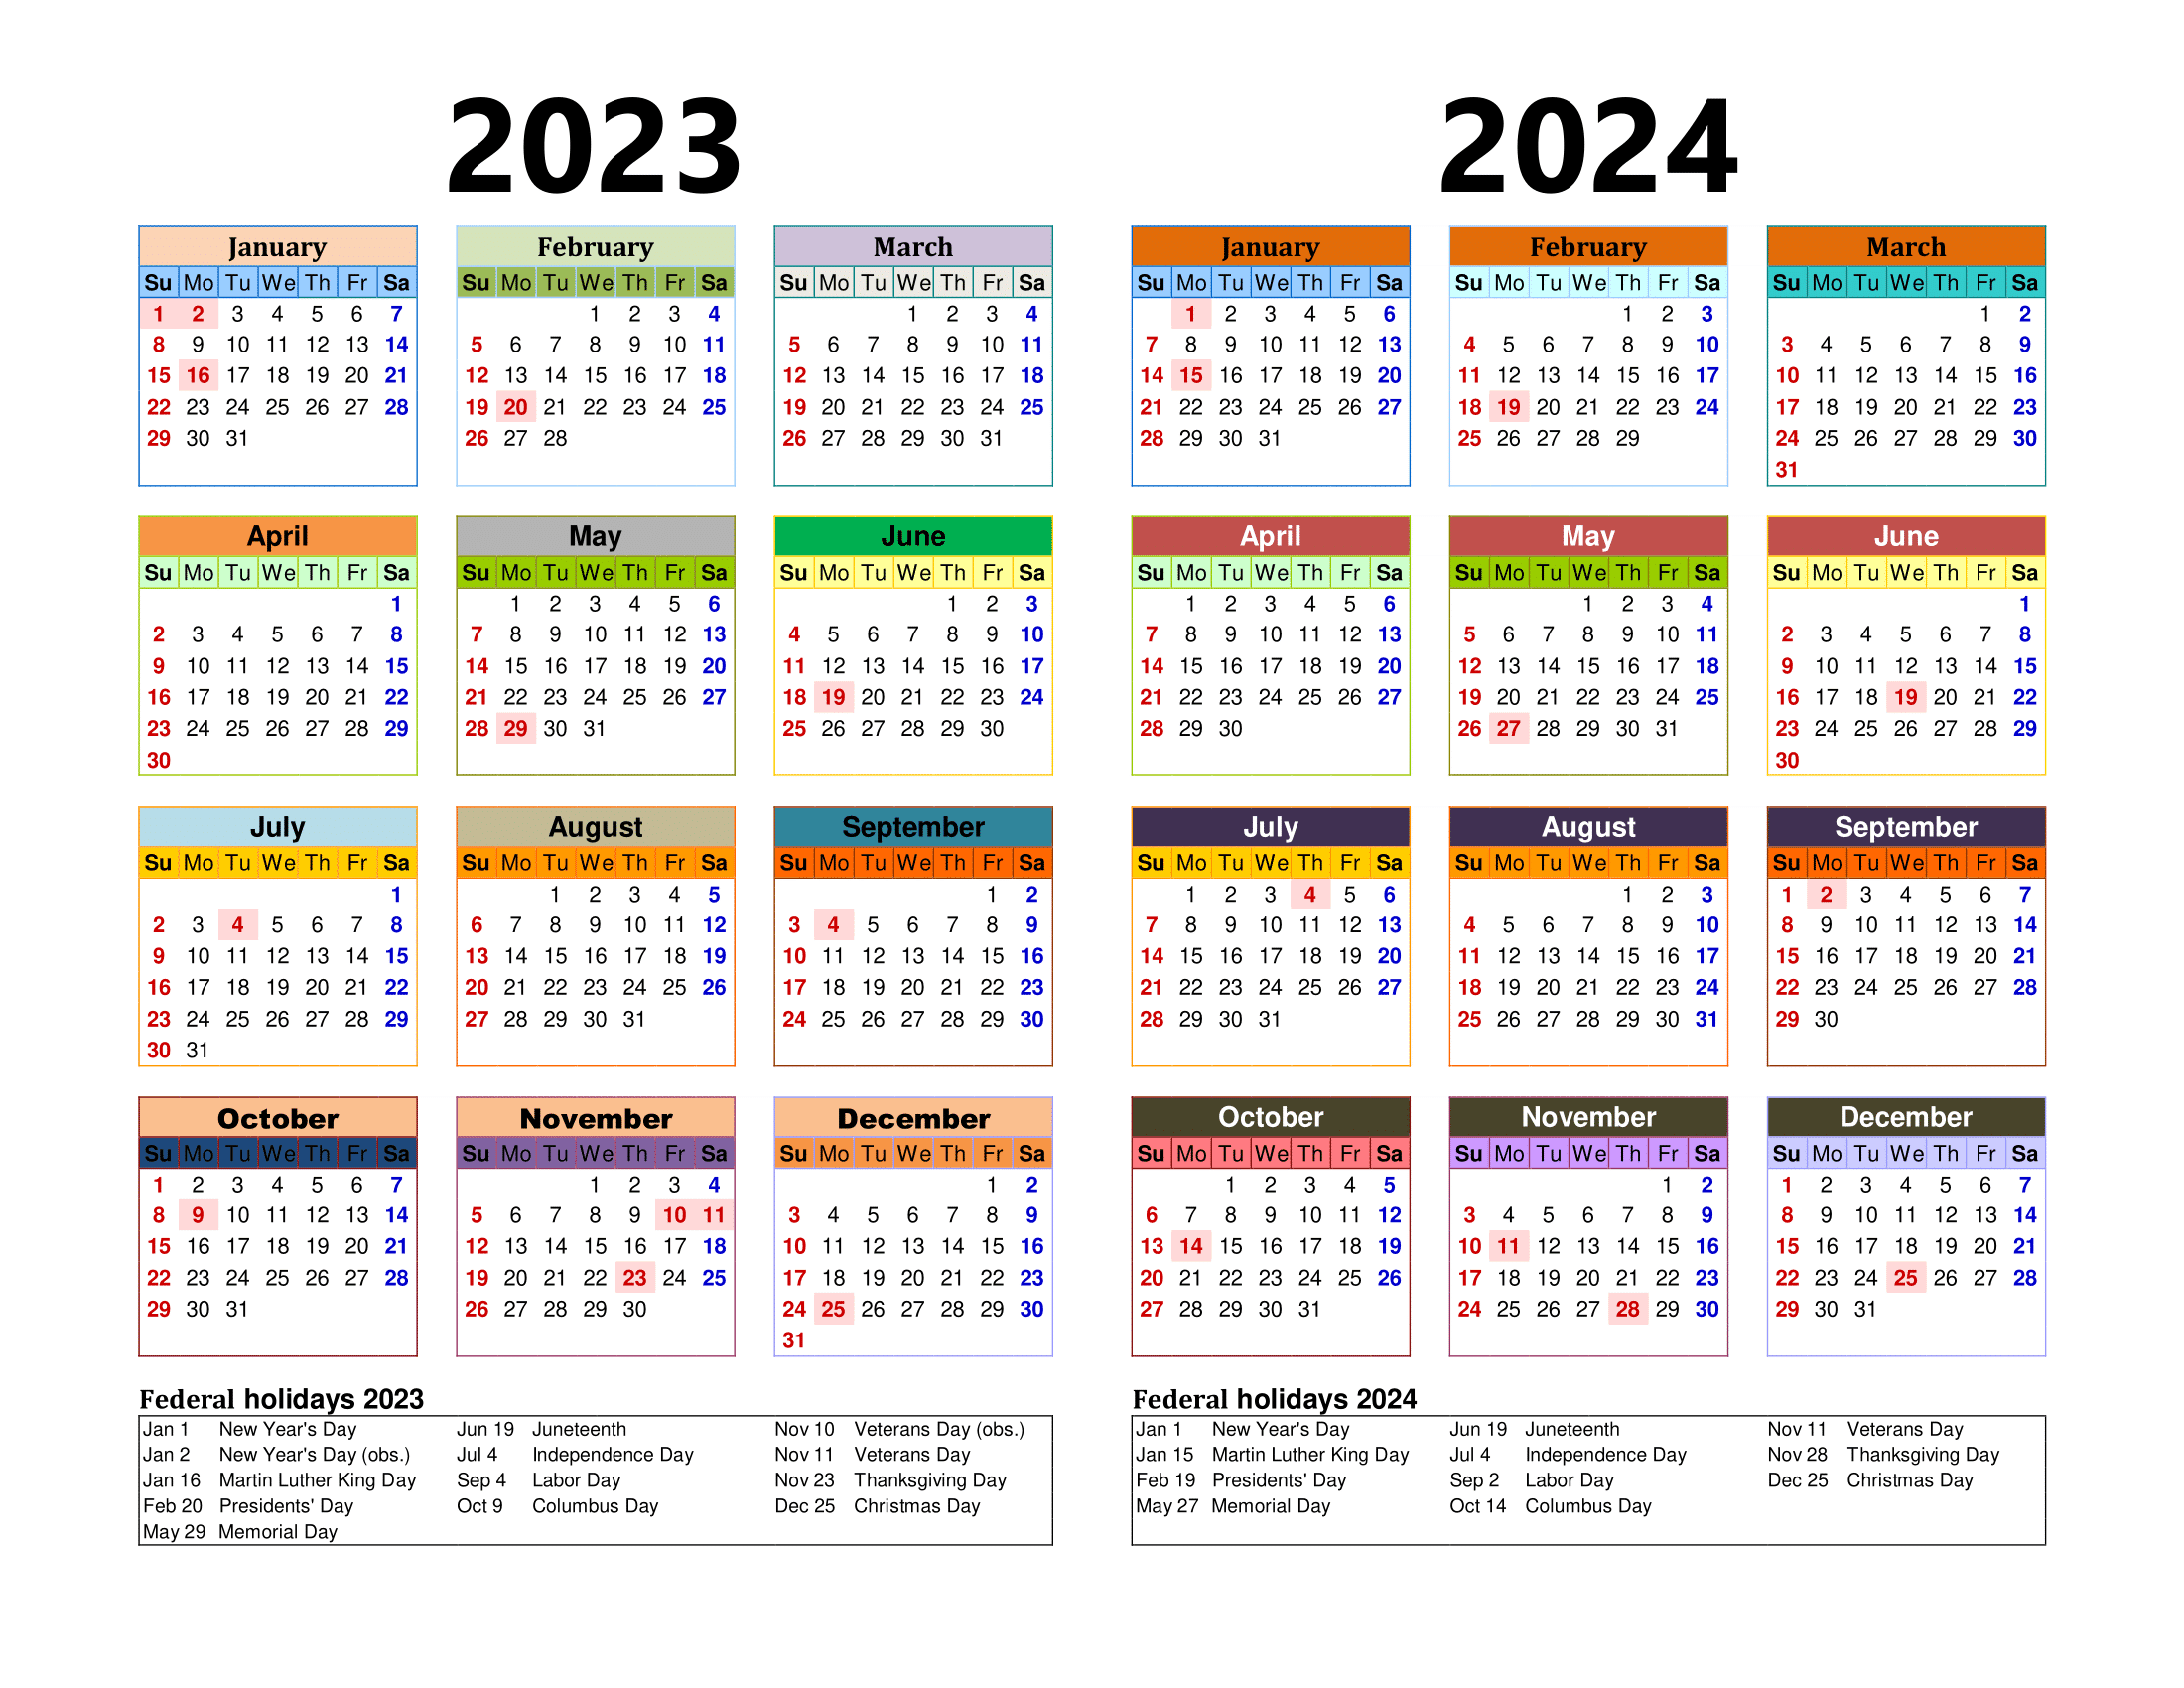 Free Printable Two Year Calendar Templates For 2023 And 2024 In Pdf for Free 2023 Calendar 2024 Printable